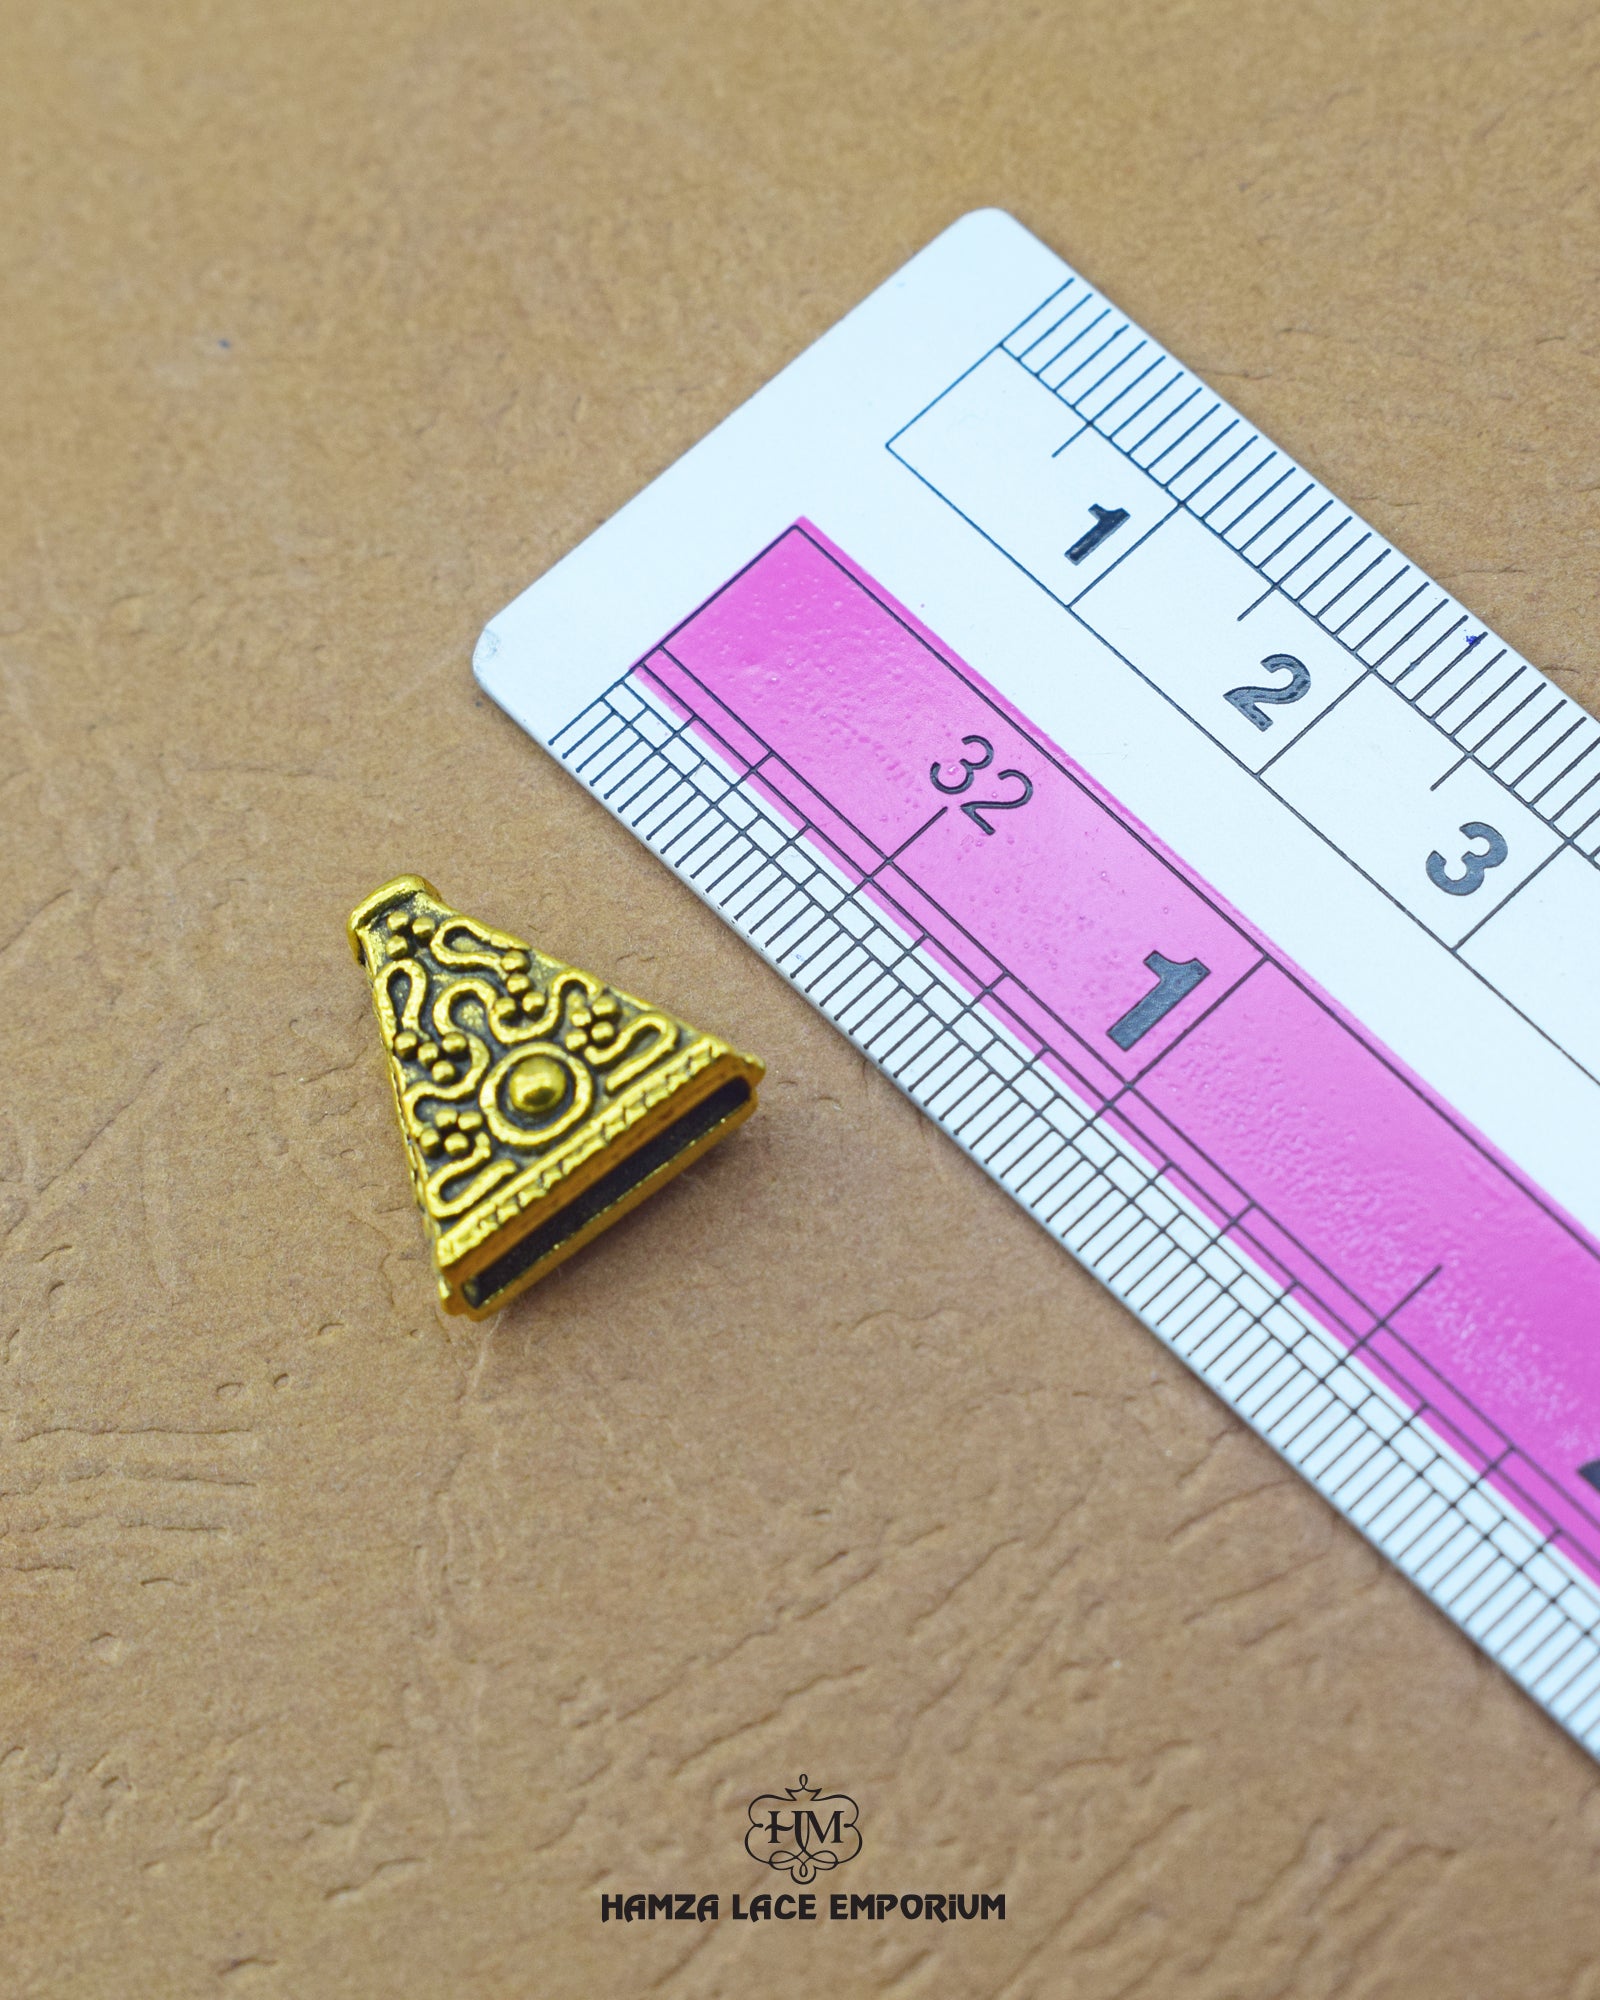 'Triangle Design Button MA664' with ruler for size reference in the product image.